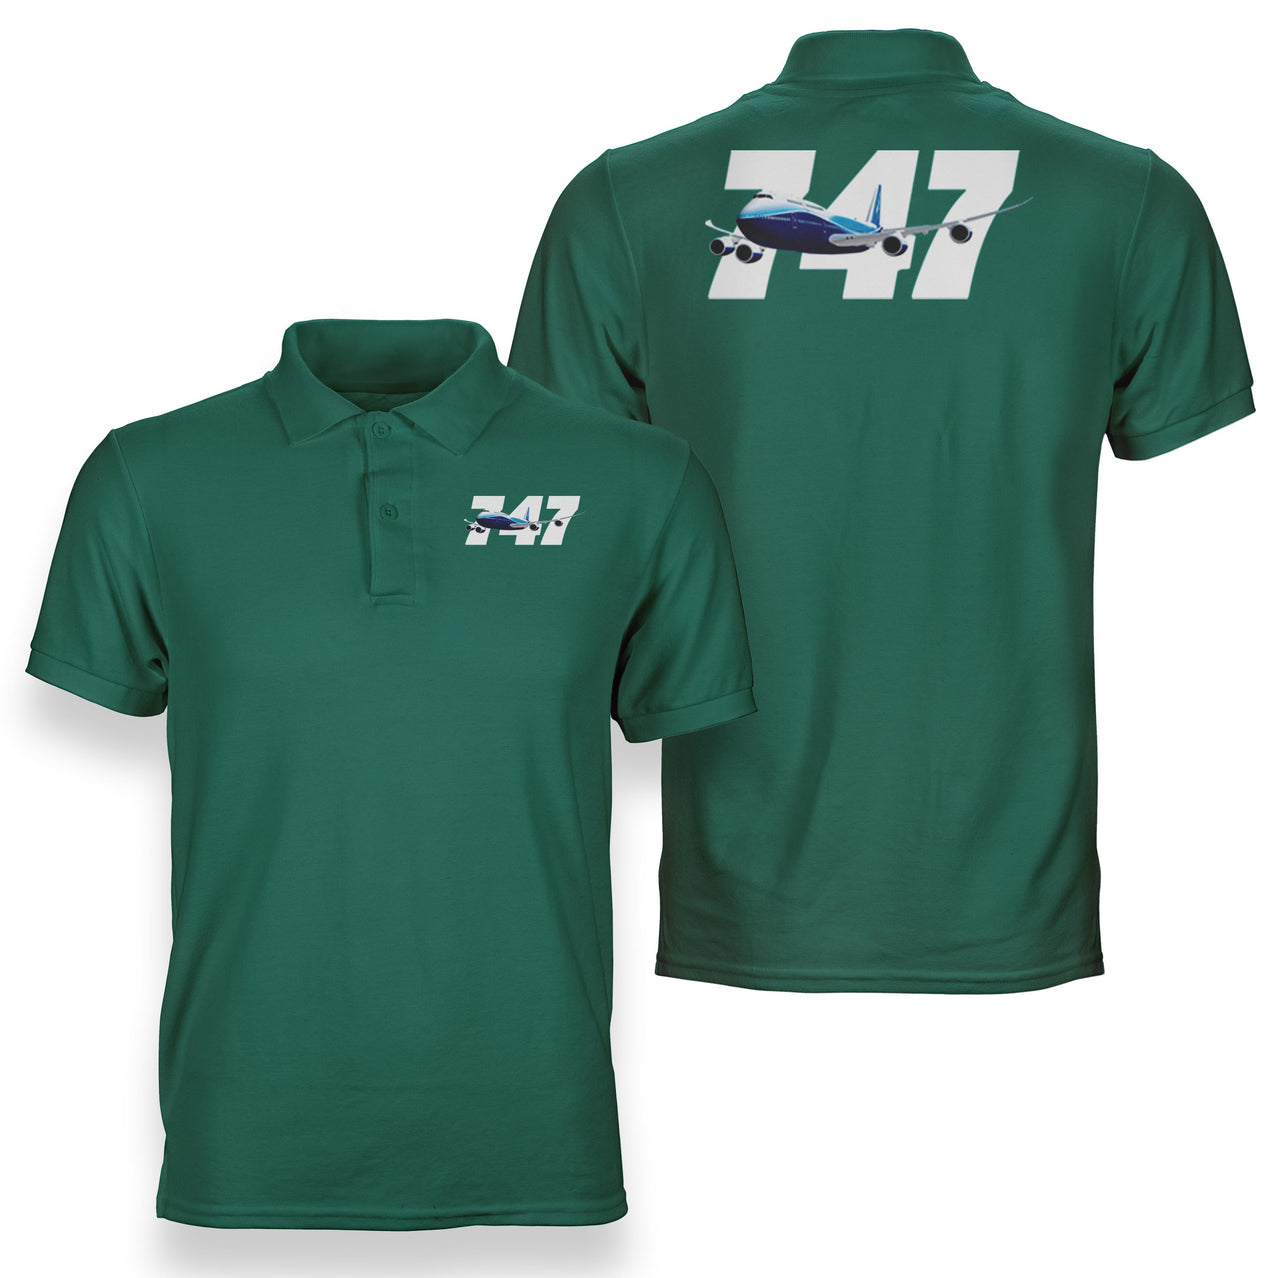 Super Boeing 747 Designed Double Side Polo T-Shirts